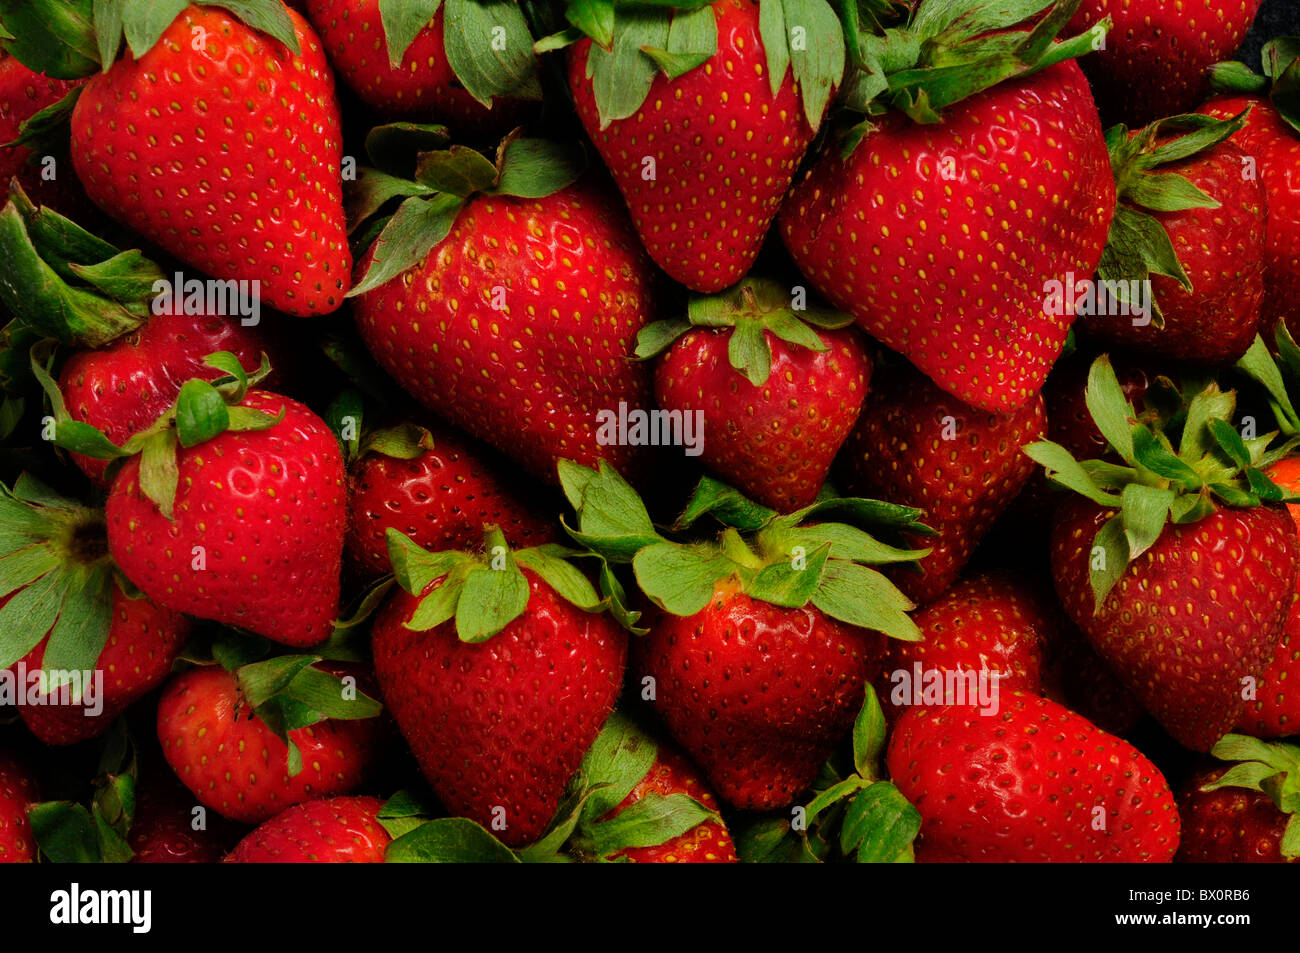 Strawberries with leaves filling the frame Stock Photo